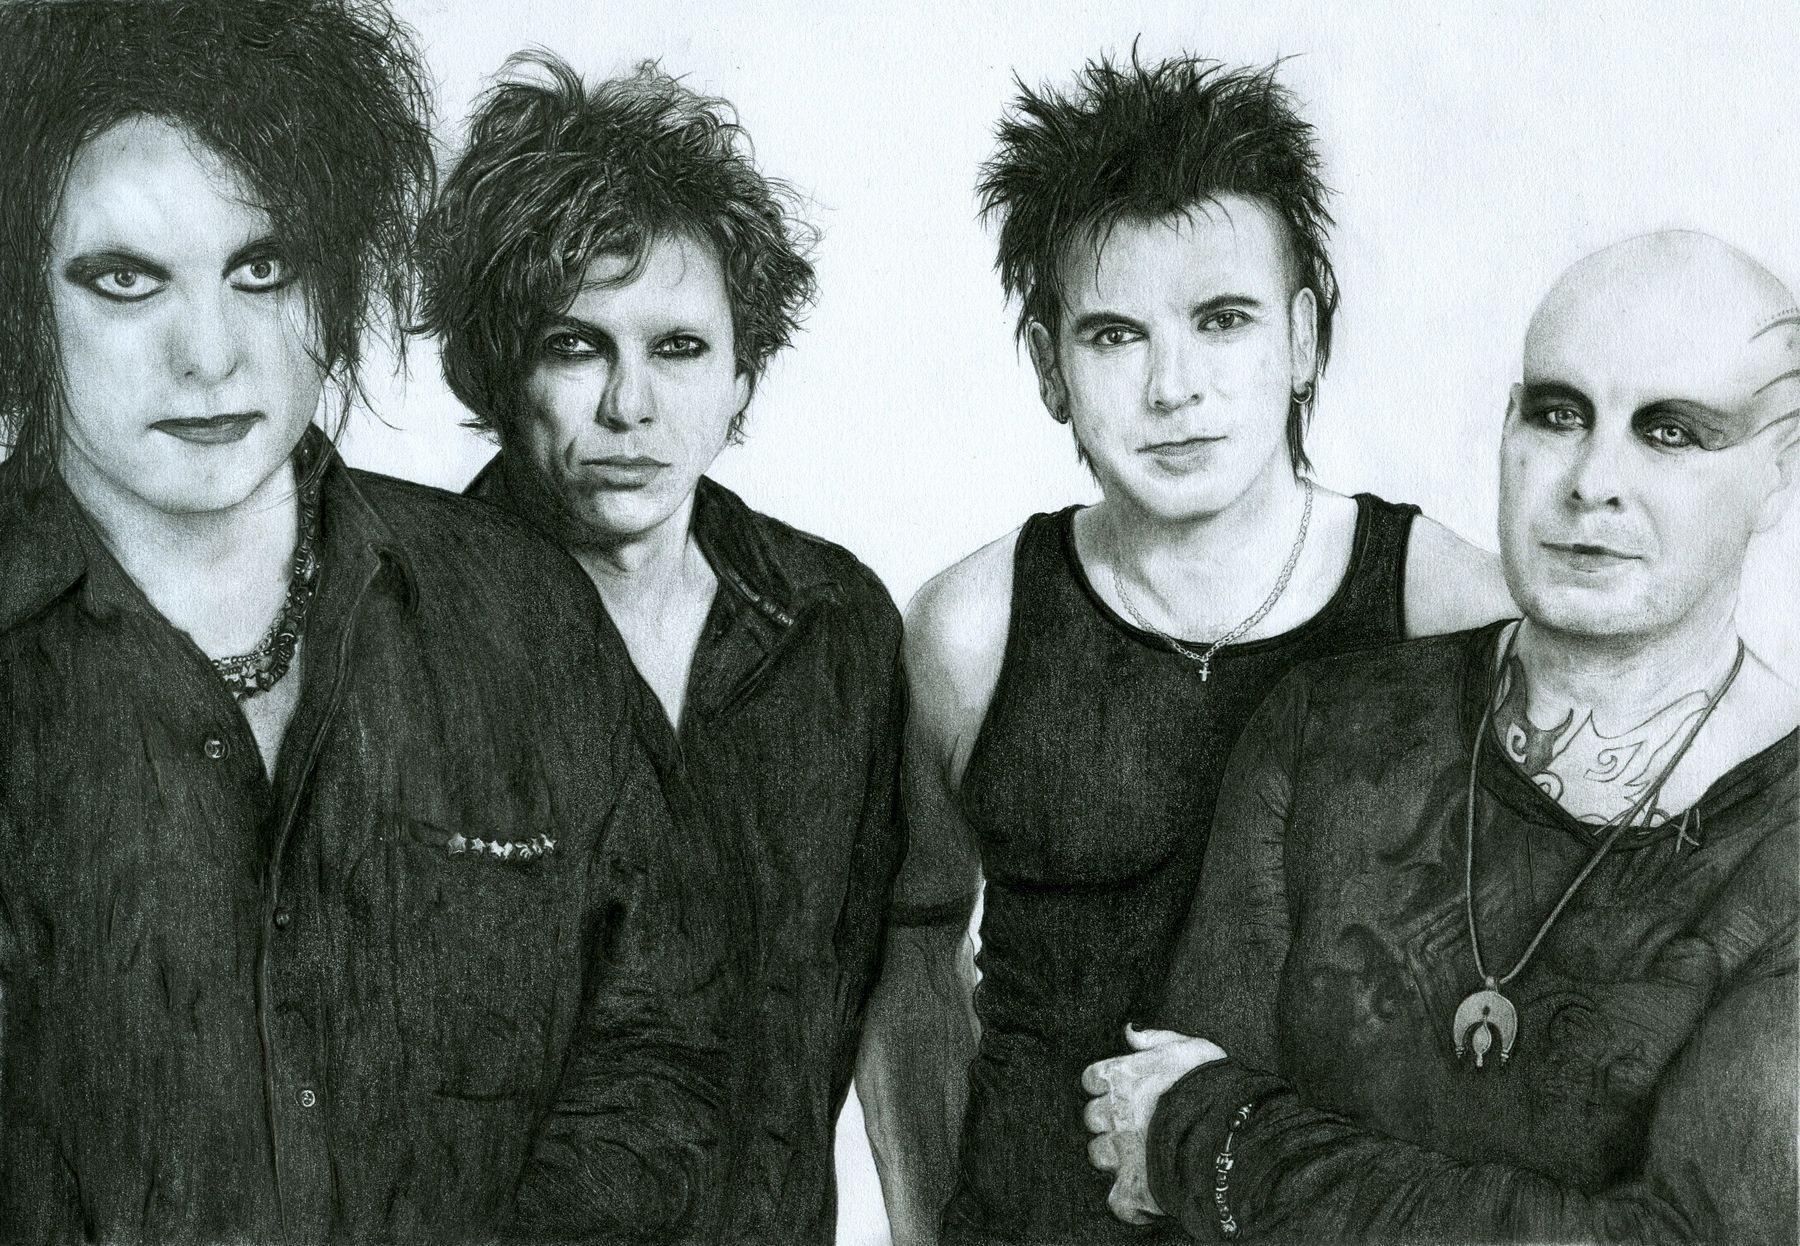 The Cure Wallpaper, The Cure Band Wallpaper And Desktop Background